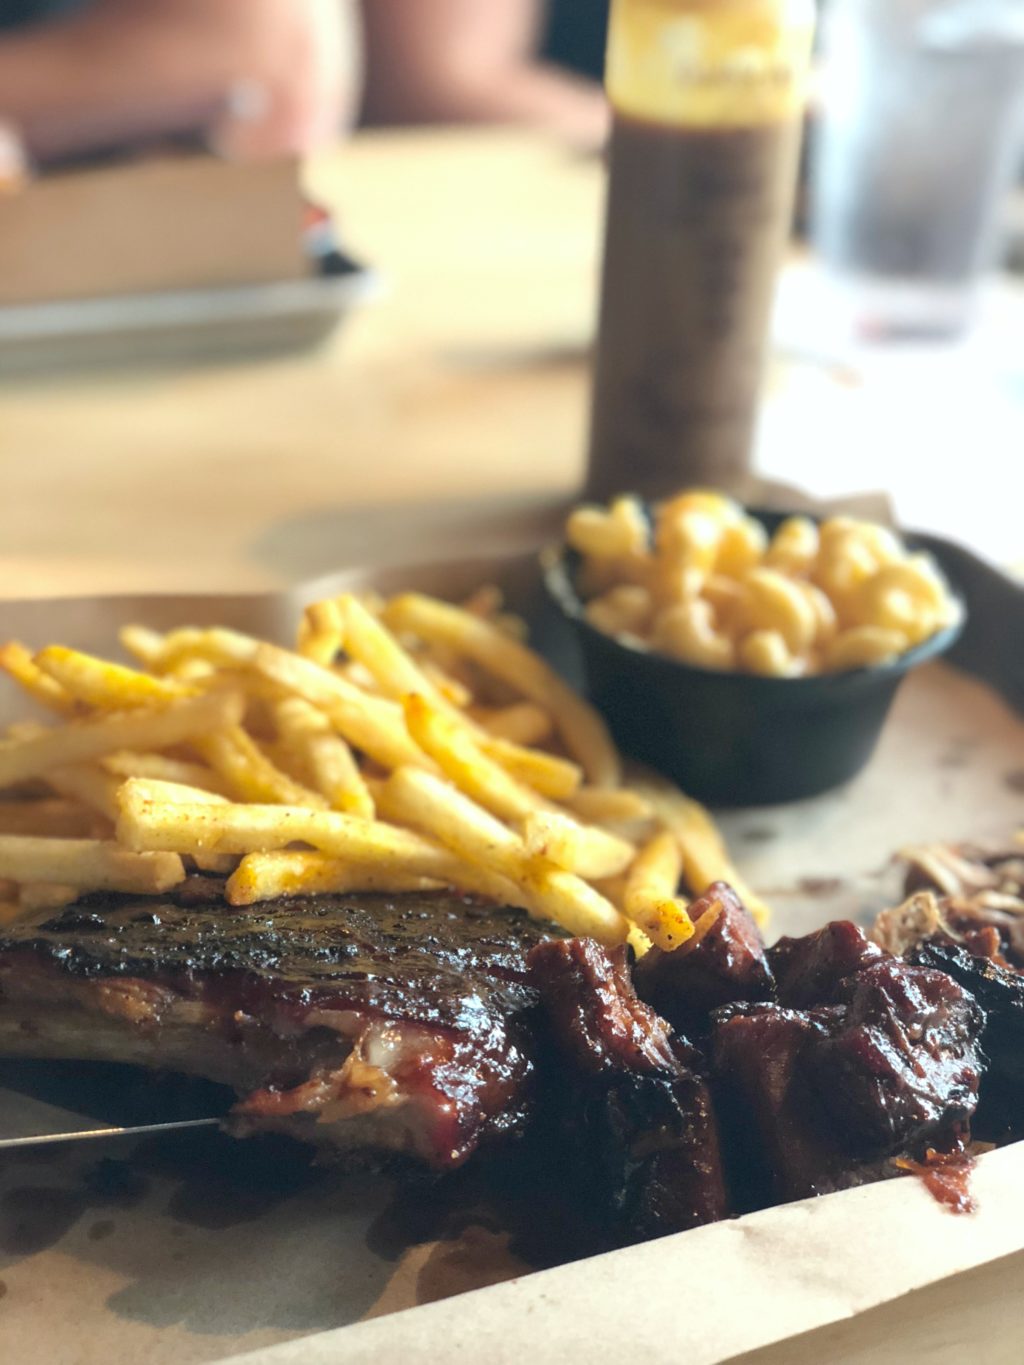 A plate filled with french fries, macaroni and cheese, a slab of smoked ribs and burnt ends.